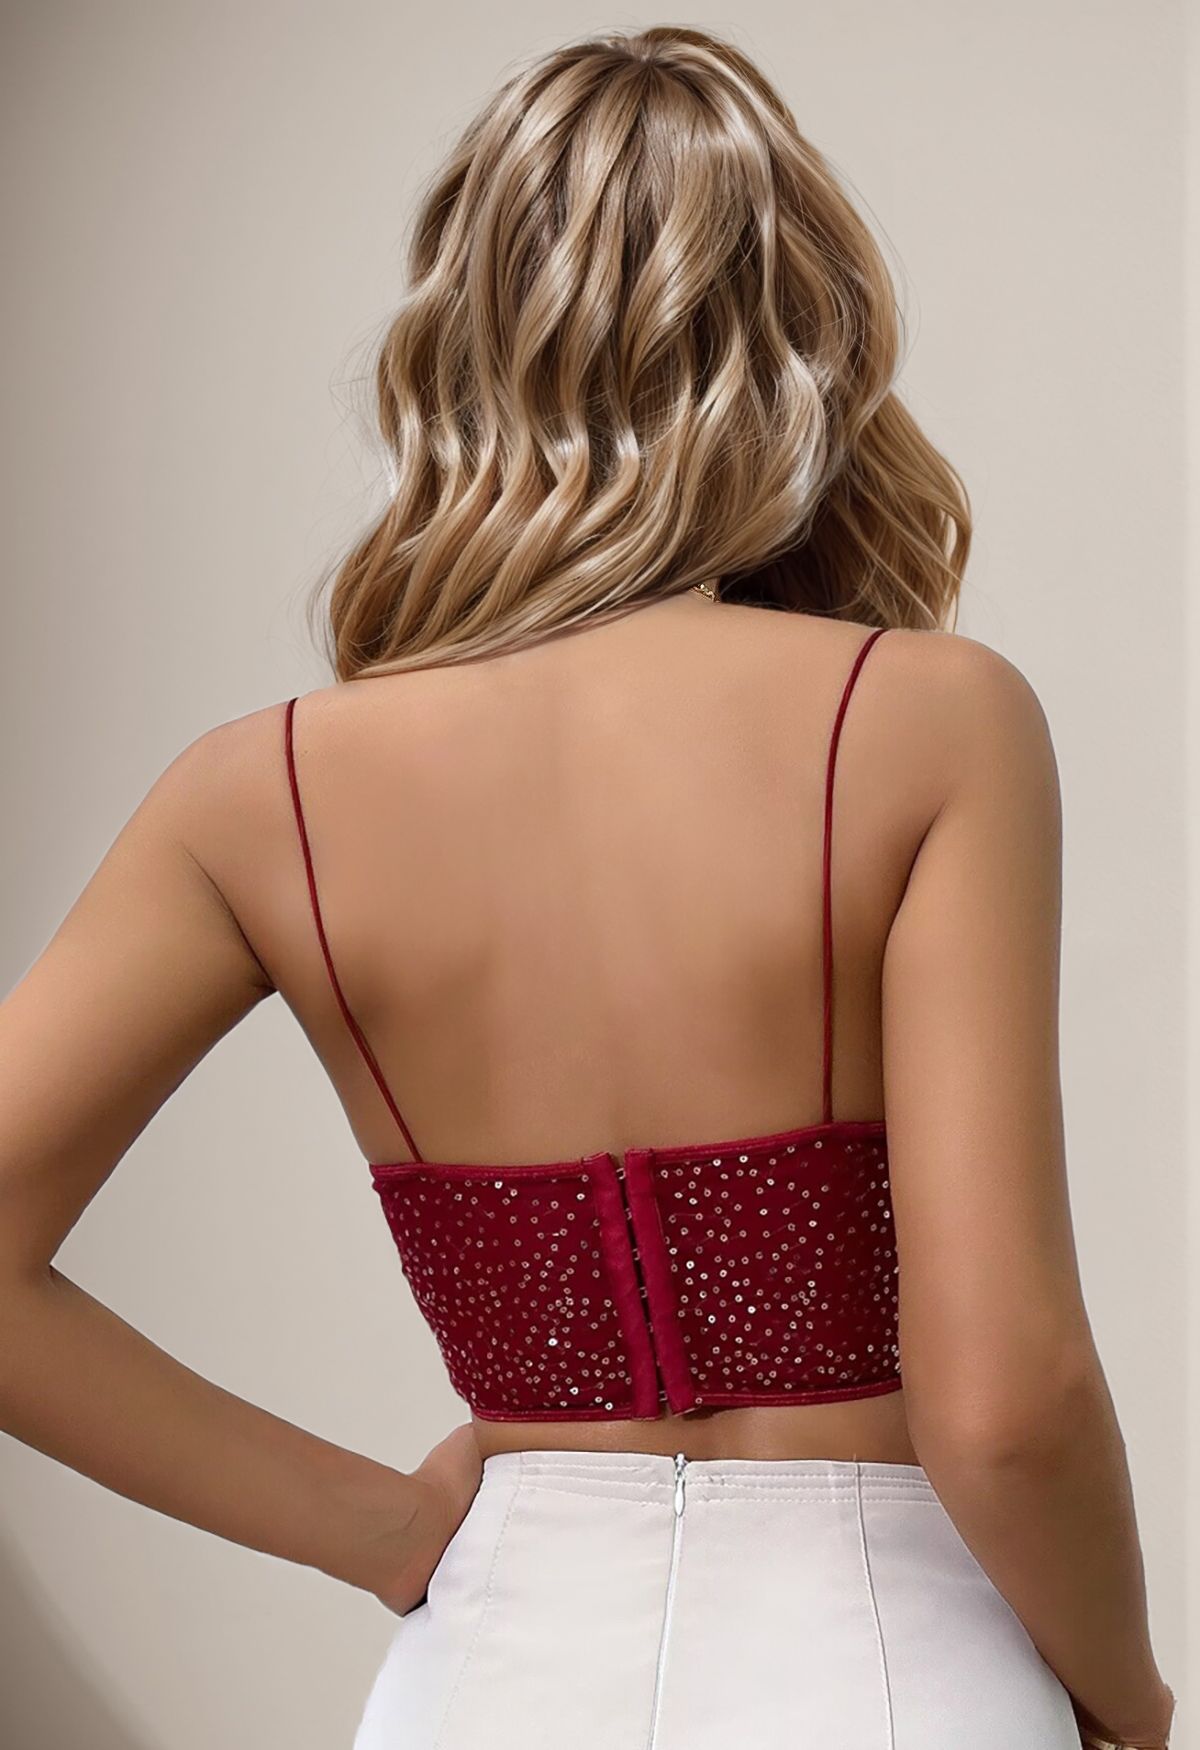 Sequin Embroidered Corset Bustier Top in Burgundy - Retro, Indie and Unique  Fashion